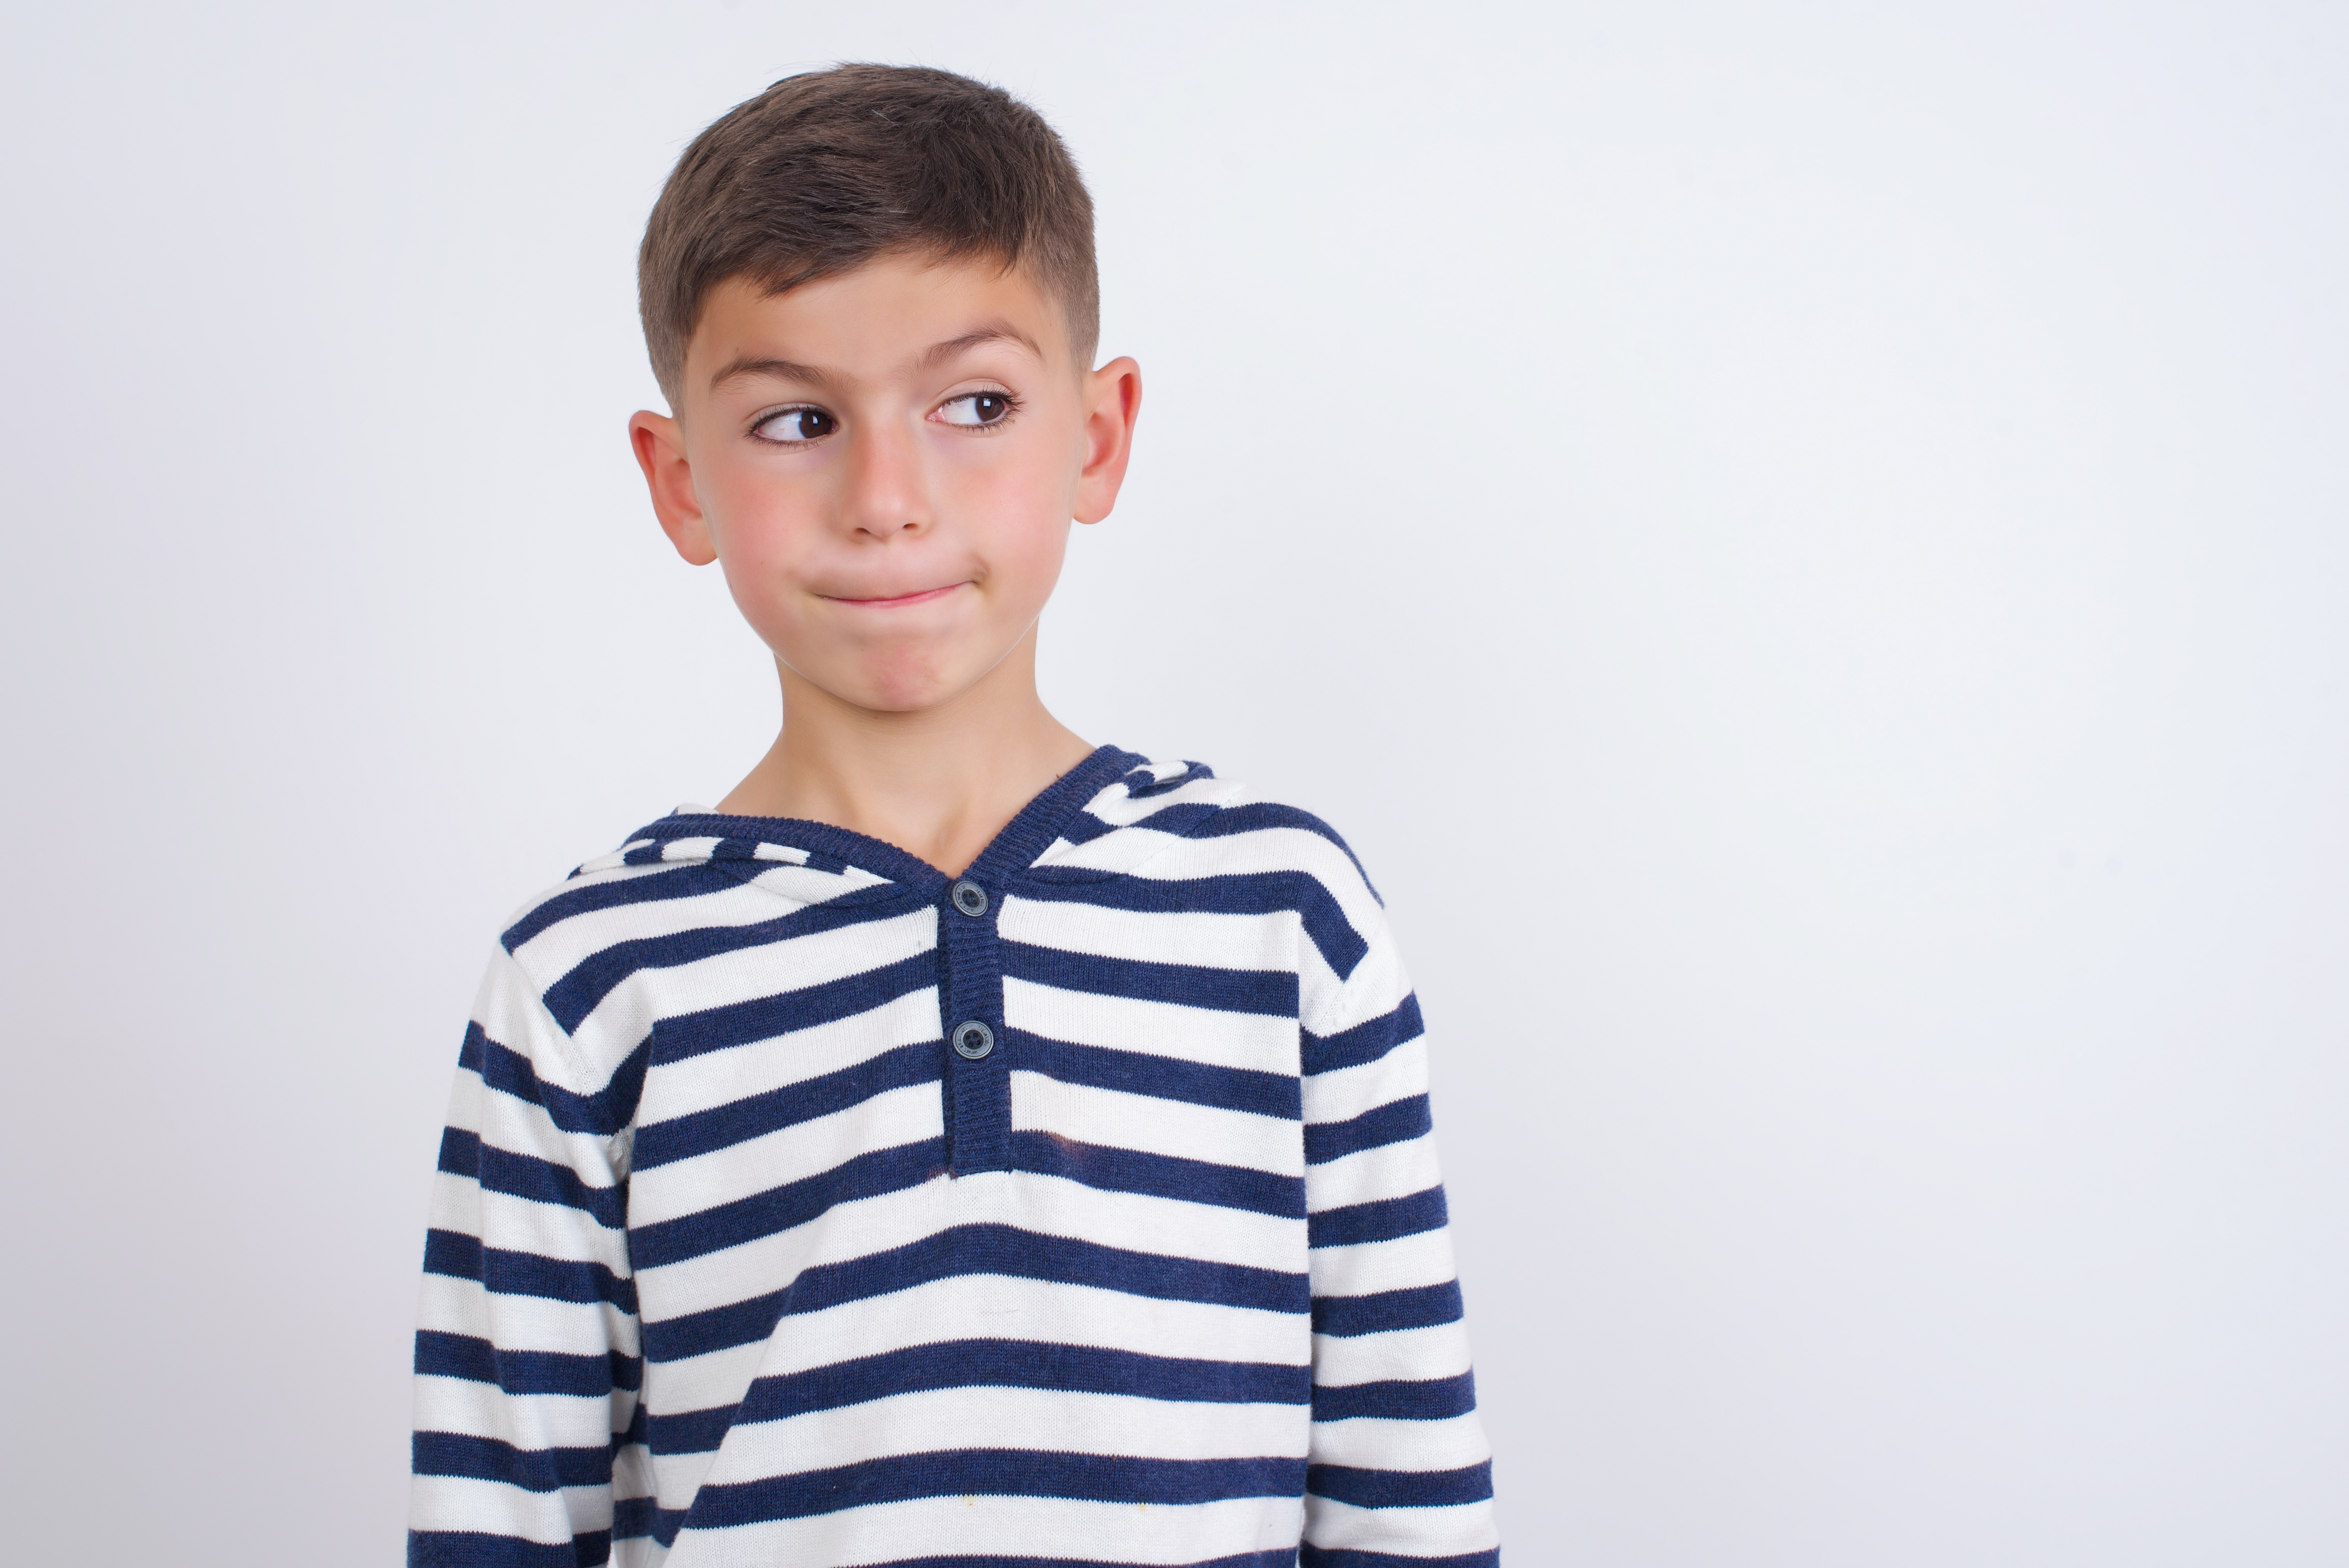 A young boy looking confused | Source: Shutterstock